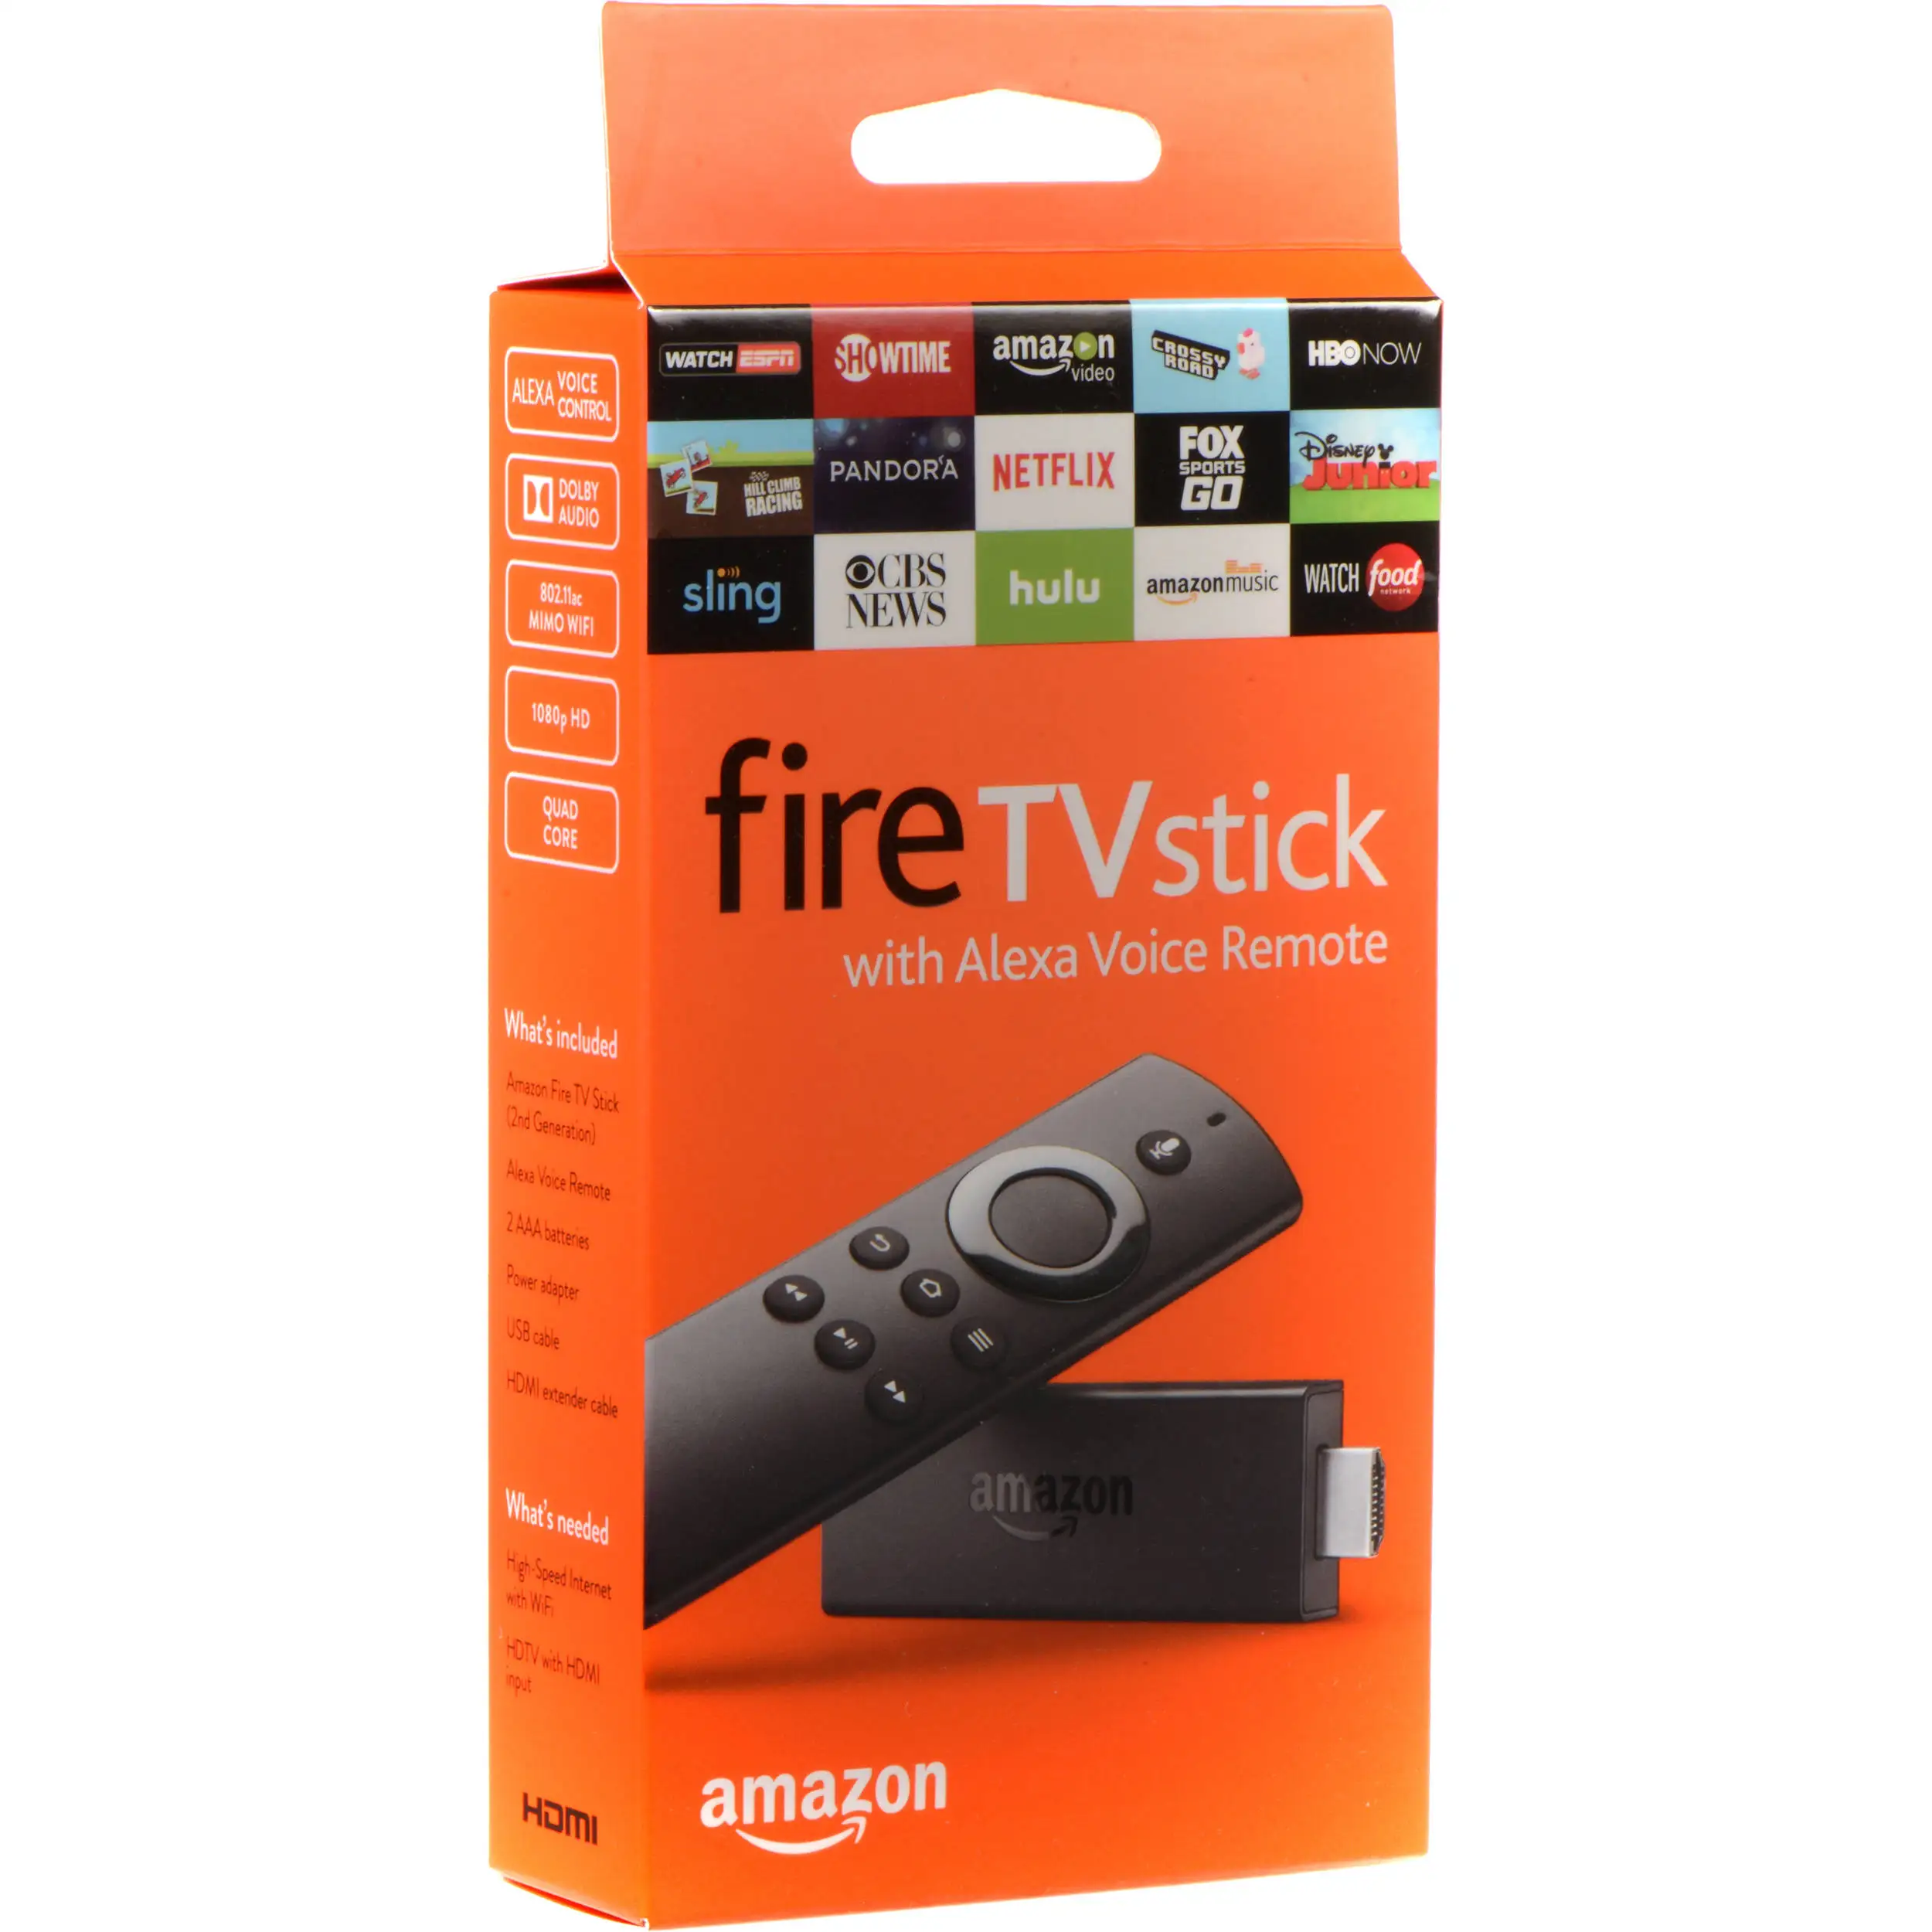 how to buy amazon fire stick